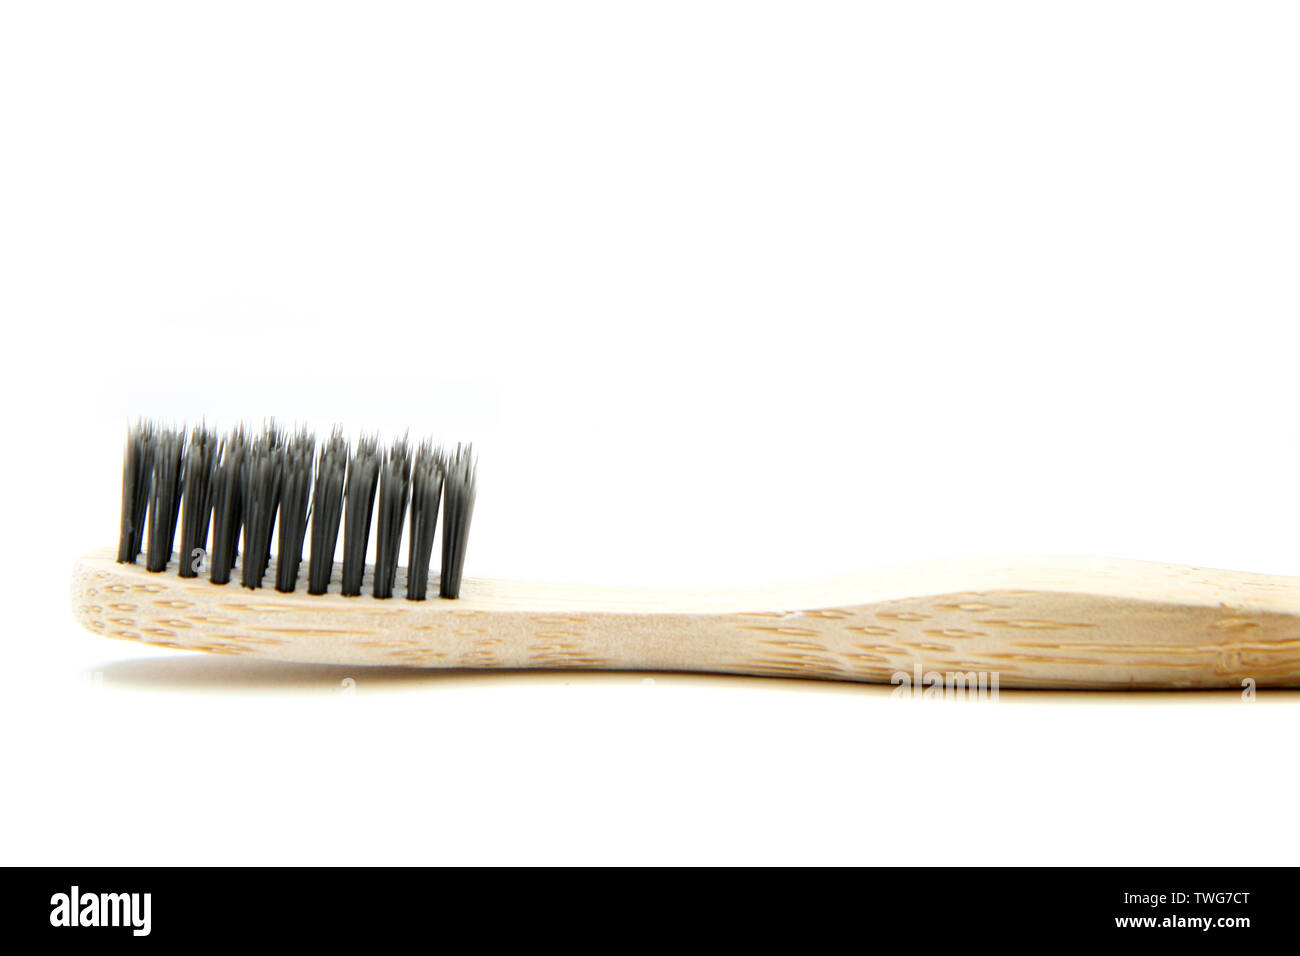 A toothbrush from natural materials. Made from bamboo wood. Isolated on a white background. Stock Photo